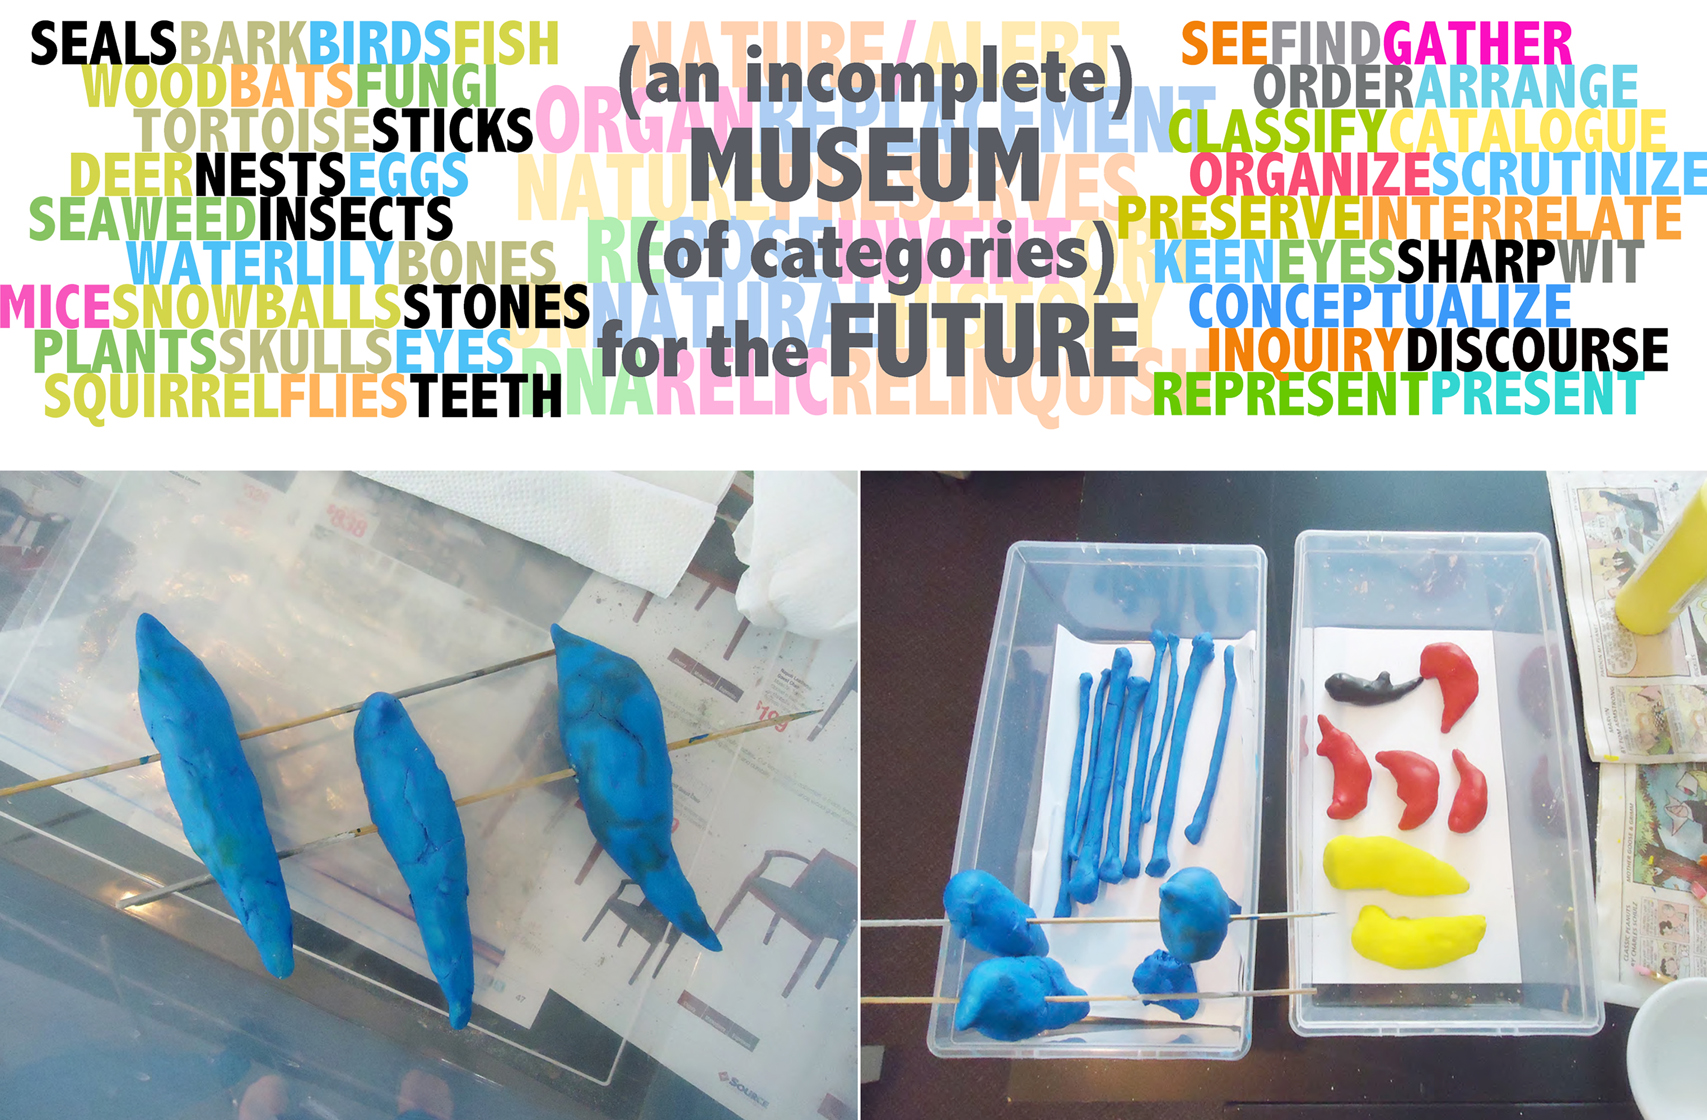 Susan Coolen, : “(an incomplete) MUSEUM (of categories) for the FUTURE”, new works-in-progress: mummified birds in wax and clay, bird bones in clay, mummified mouse [black], voles [red] and baby rabbits [yellow] in clay, 2014.